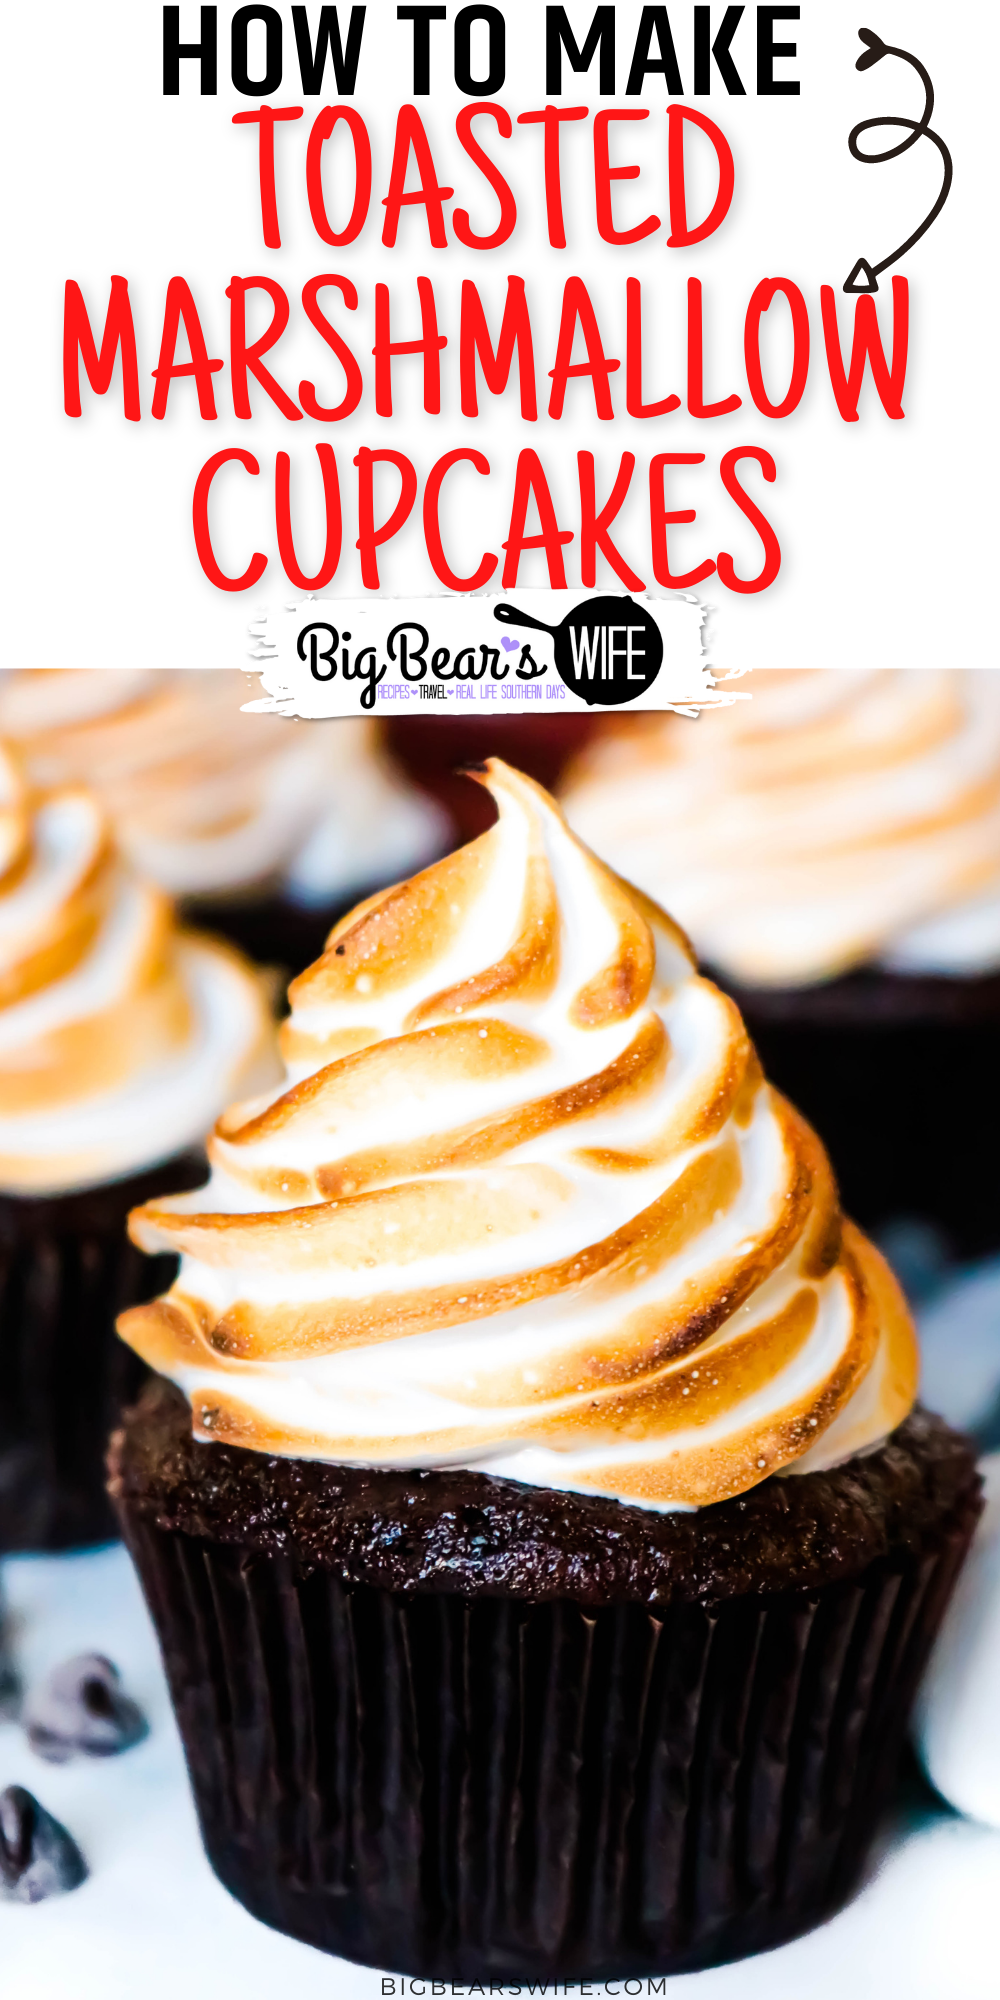 Toasted Marshmallow Cupcakes bring the taste of campfire marshmallows and homemade chocolate cupcakes together in this tasty and easy dessert recipes.  via @bigbearswife